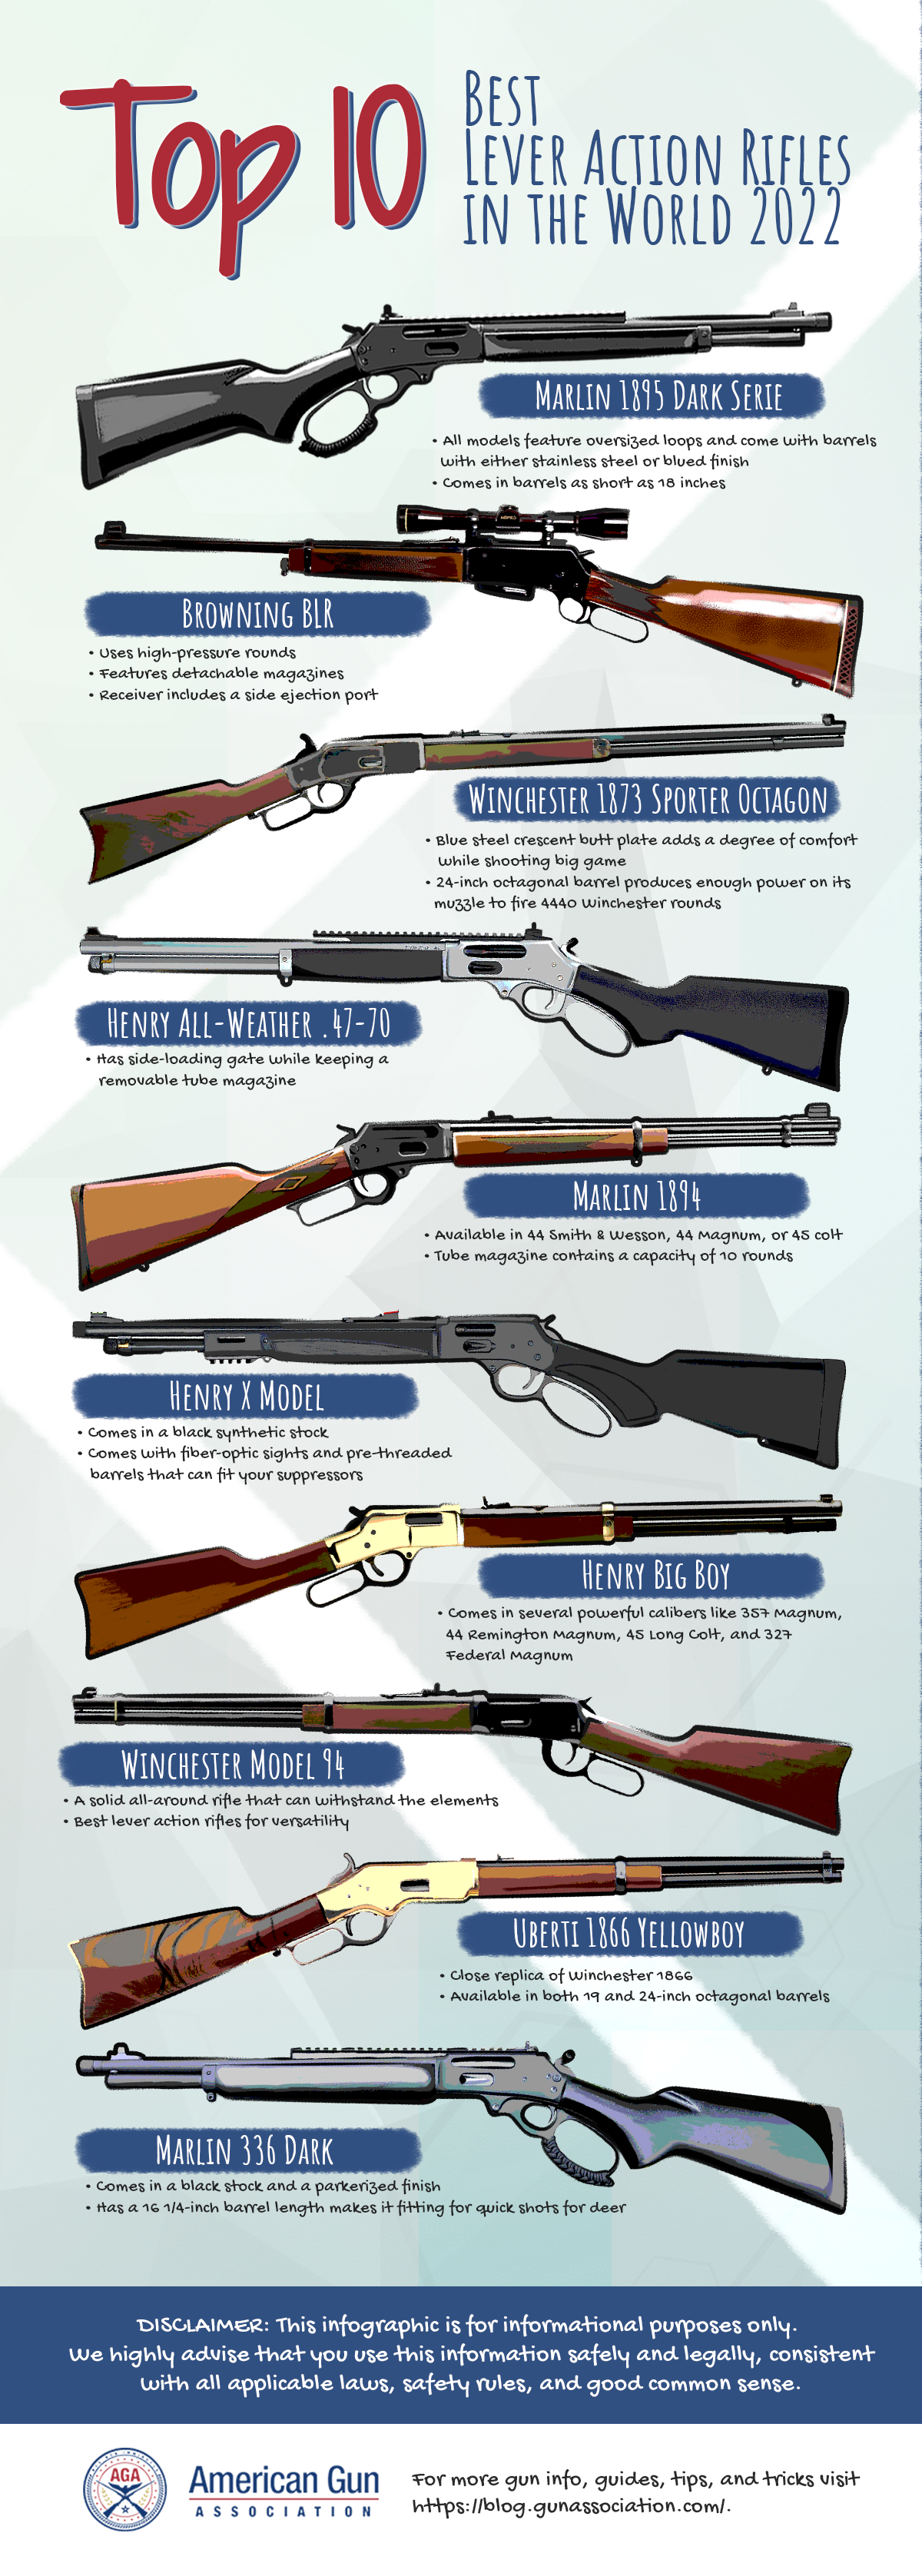 Top 10 Best Lever Action Rifles in the World 2022